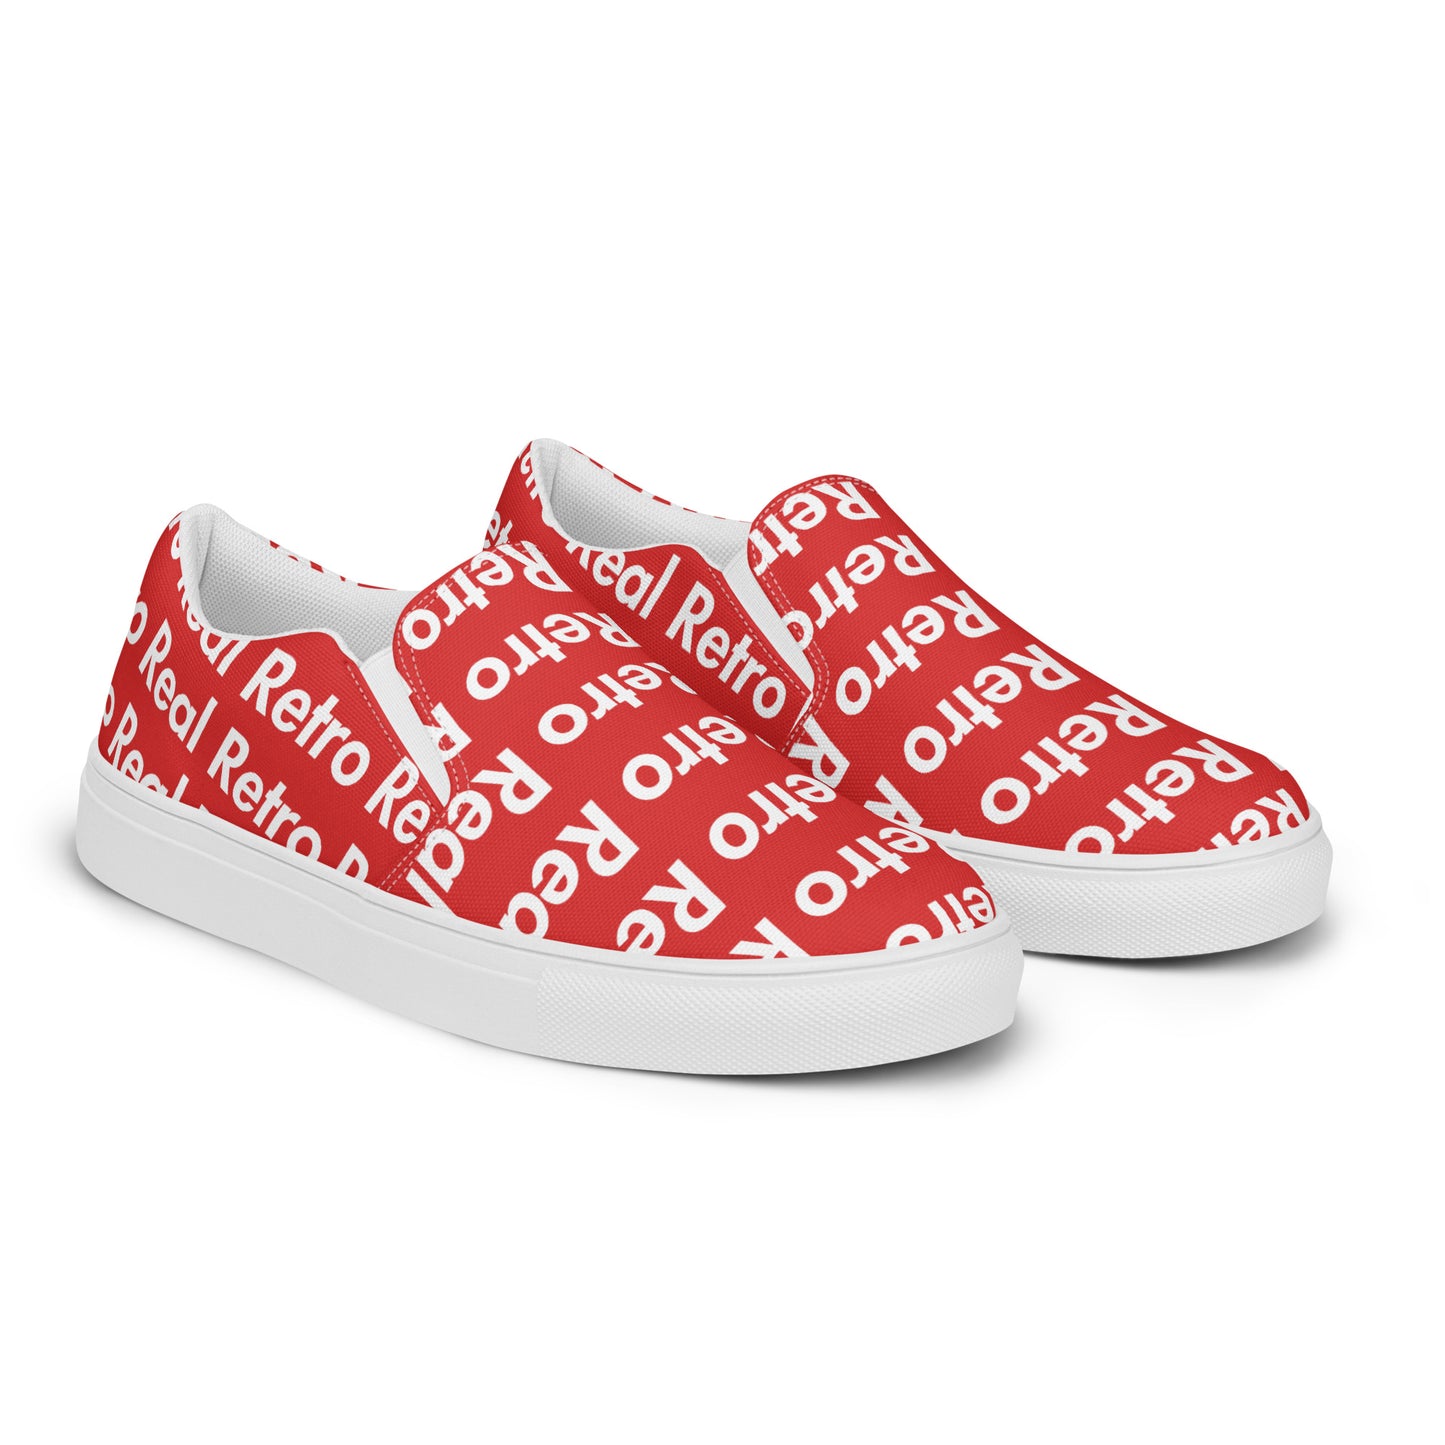 Real Retro Red Men’s slip-on canvas shoes